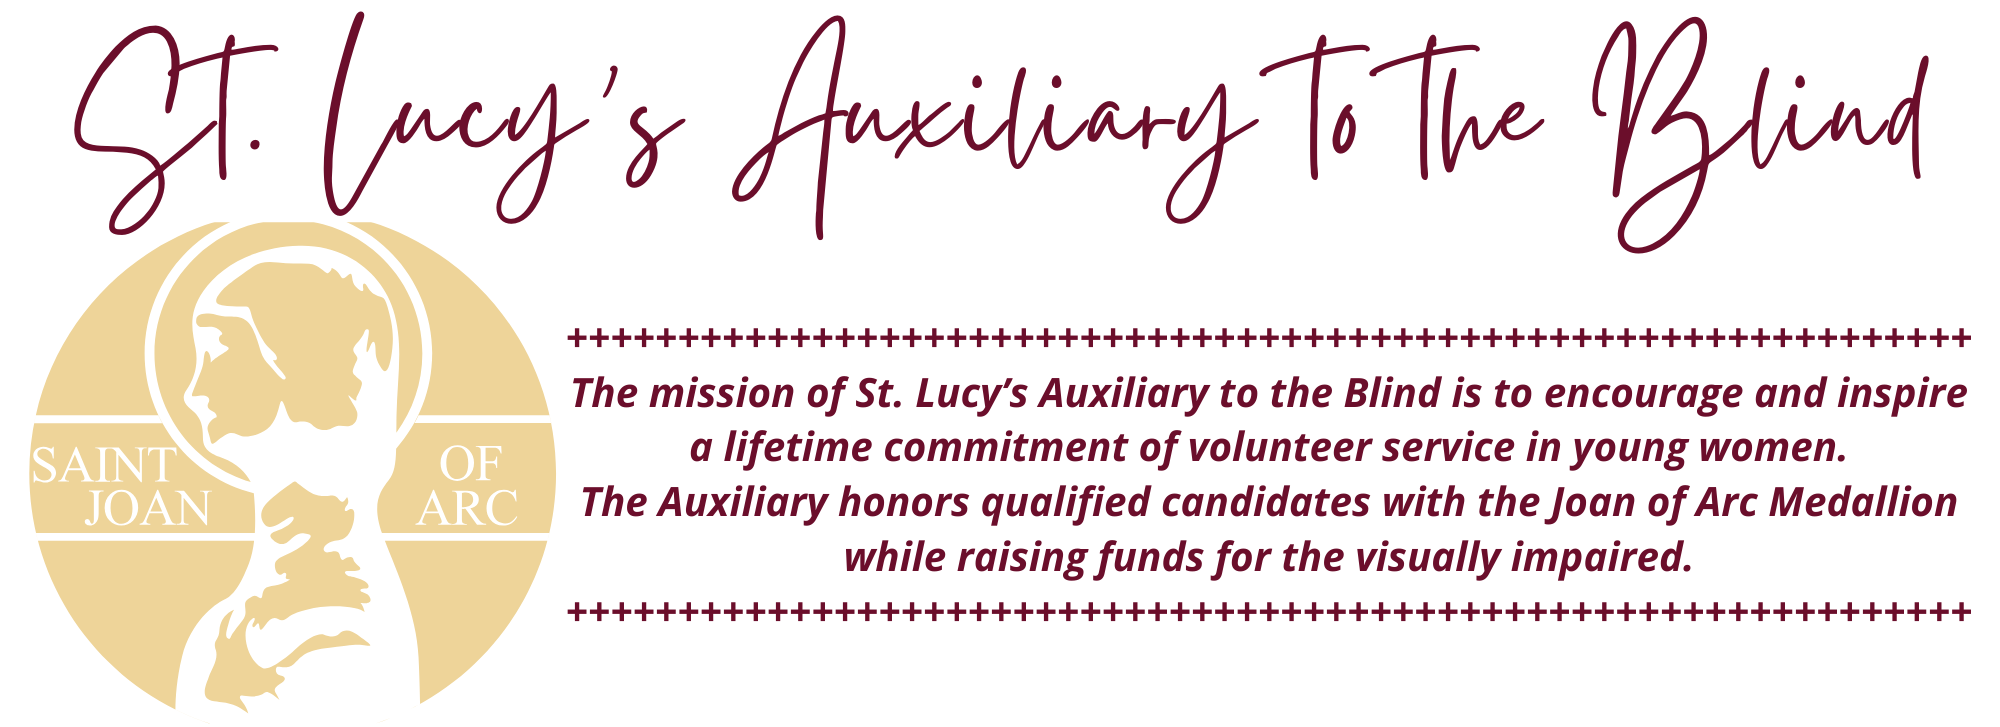 St. Lucy's Auxiliary to the Blind